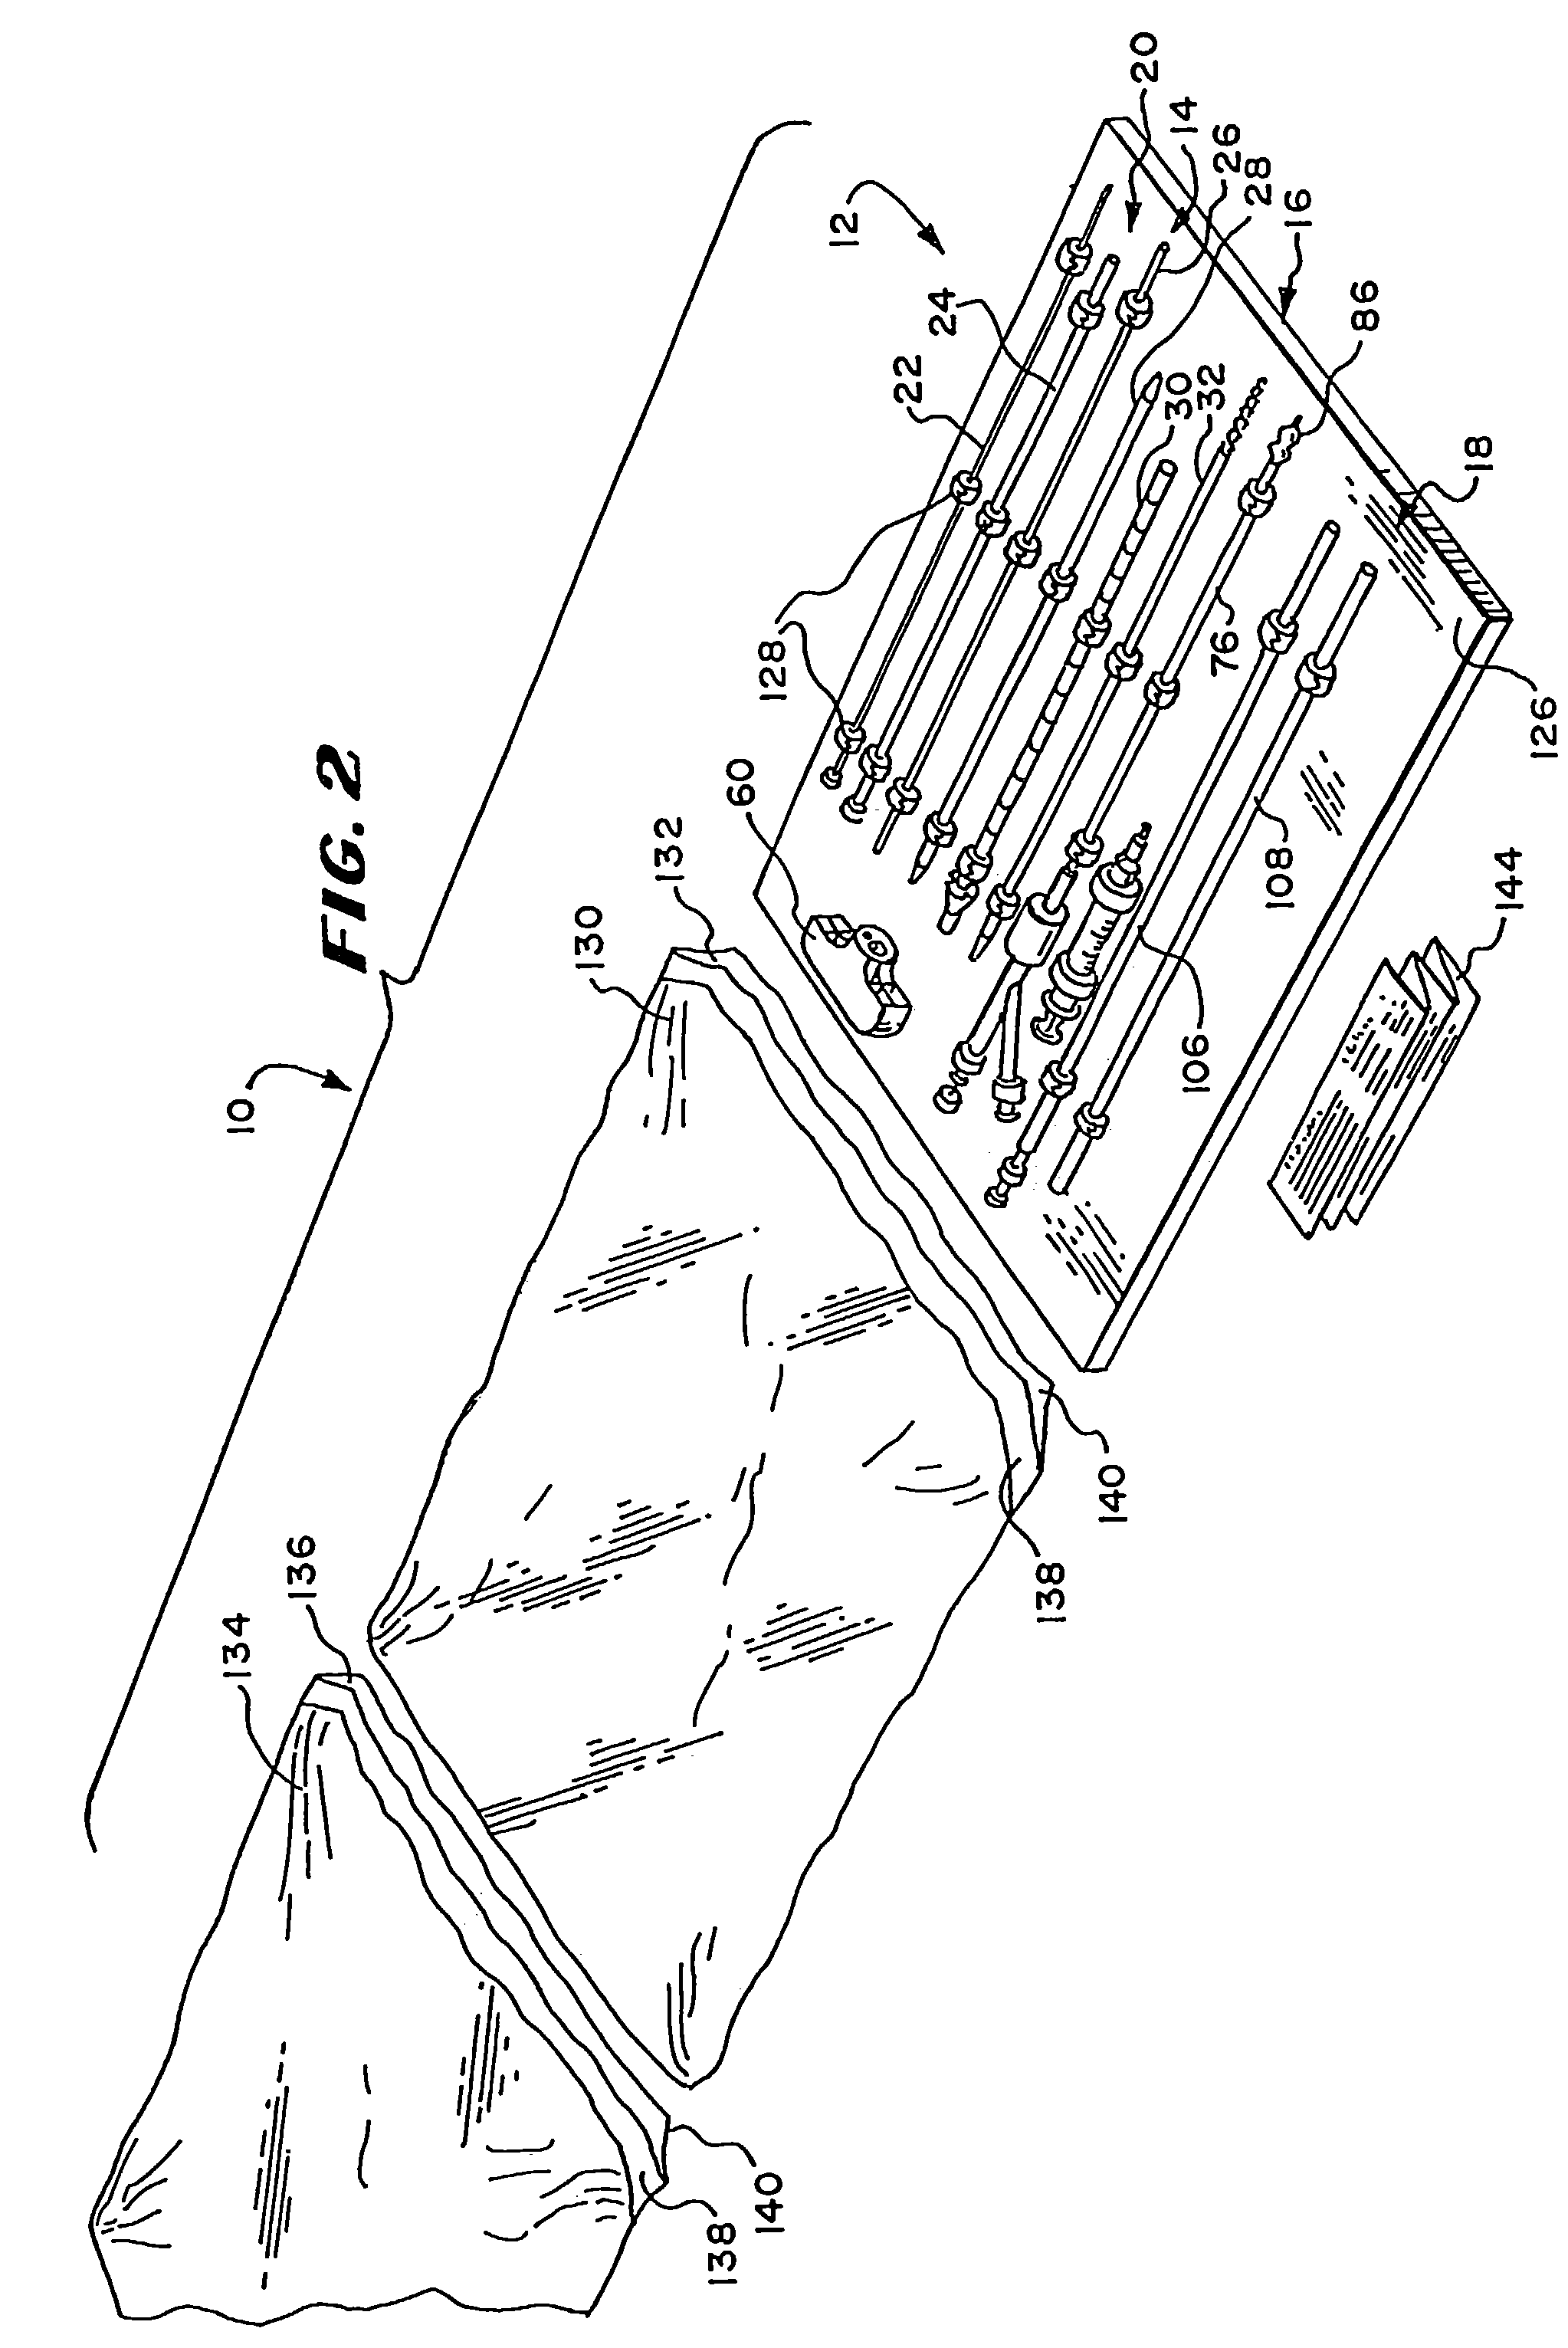 Systems and methods for placing materials into bone